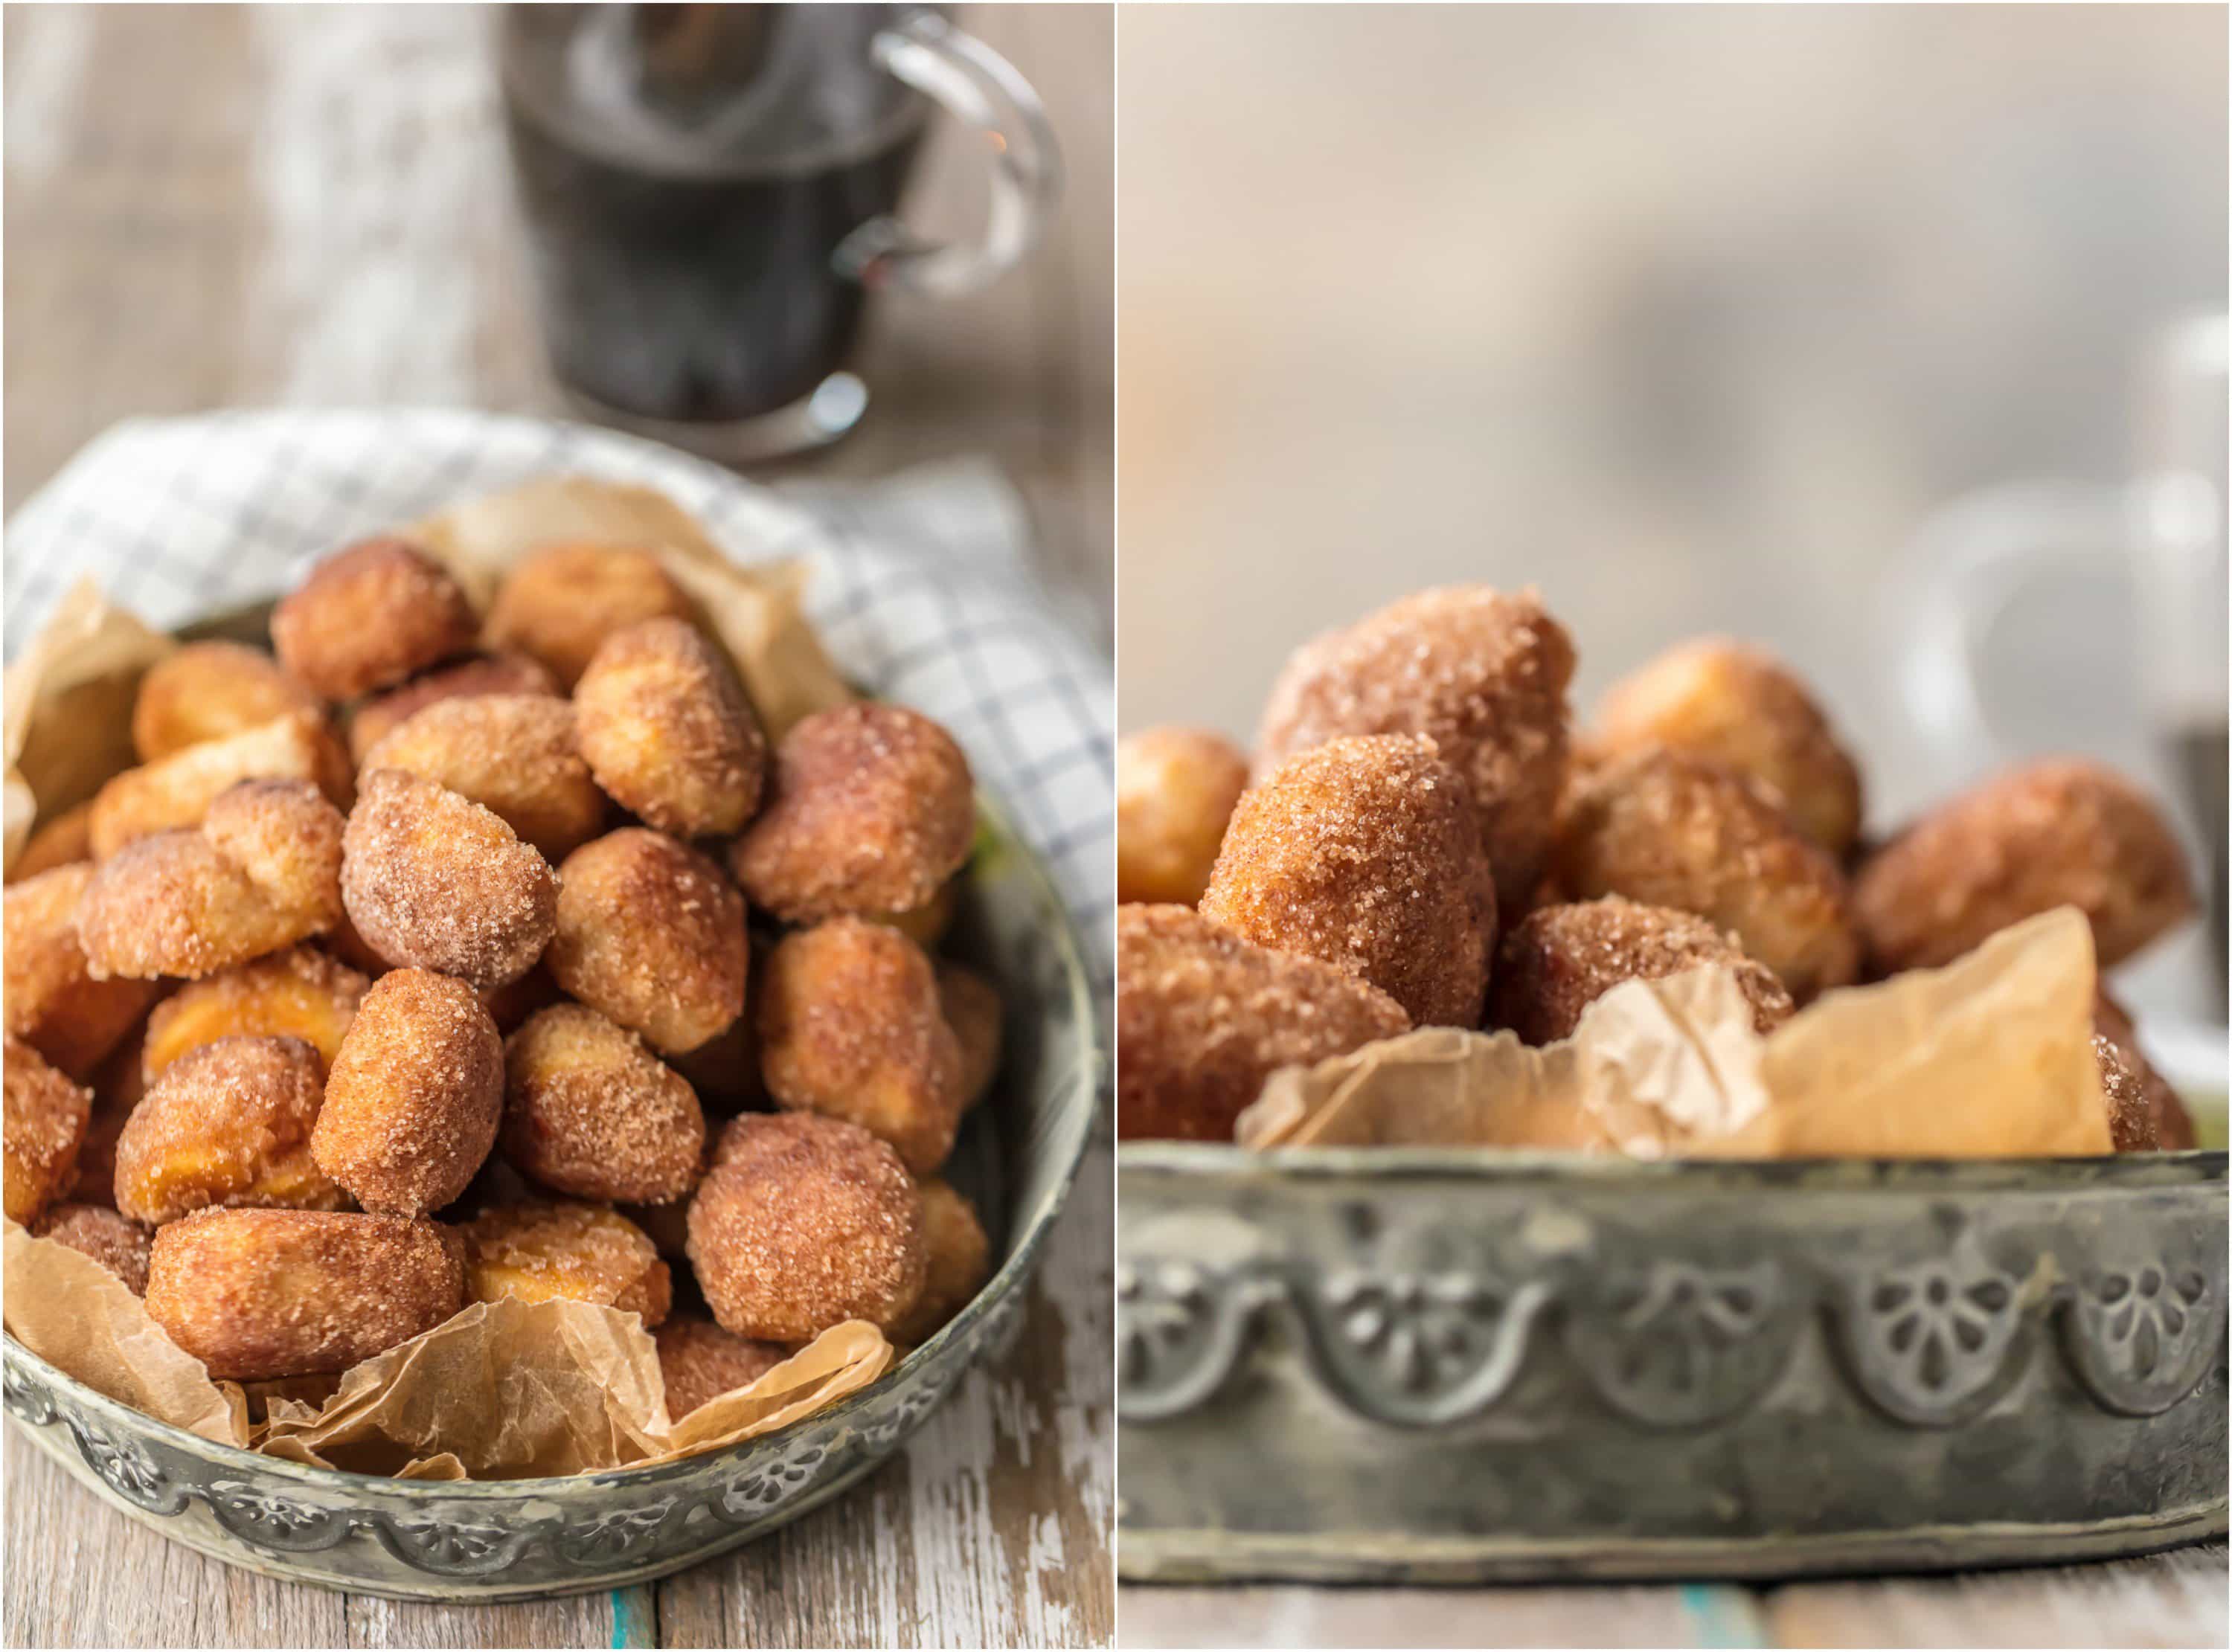 These CRISPY CINNAMON SUGAR BISCUIT BITES are the perfect breakfast, dessert, or snack for any time of day! Easy, delicious, and so fun. Making a homemade treat just doesn't get simpler than these tasty bites!